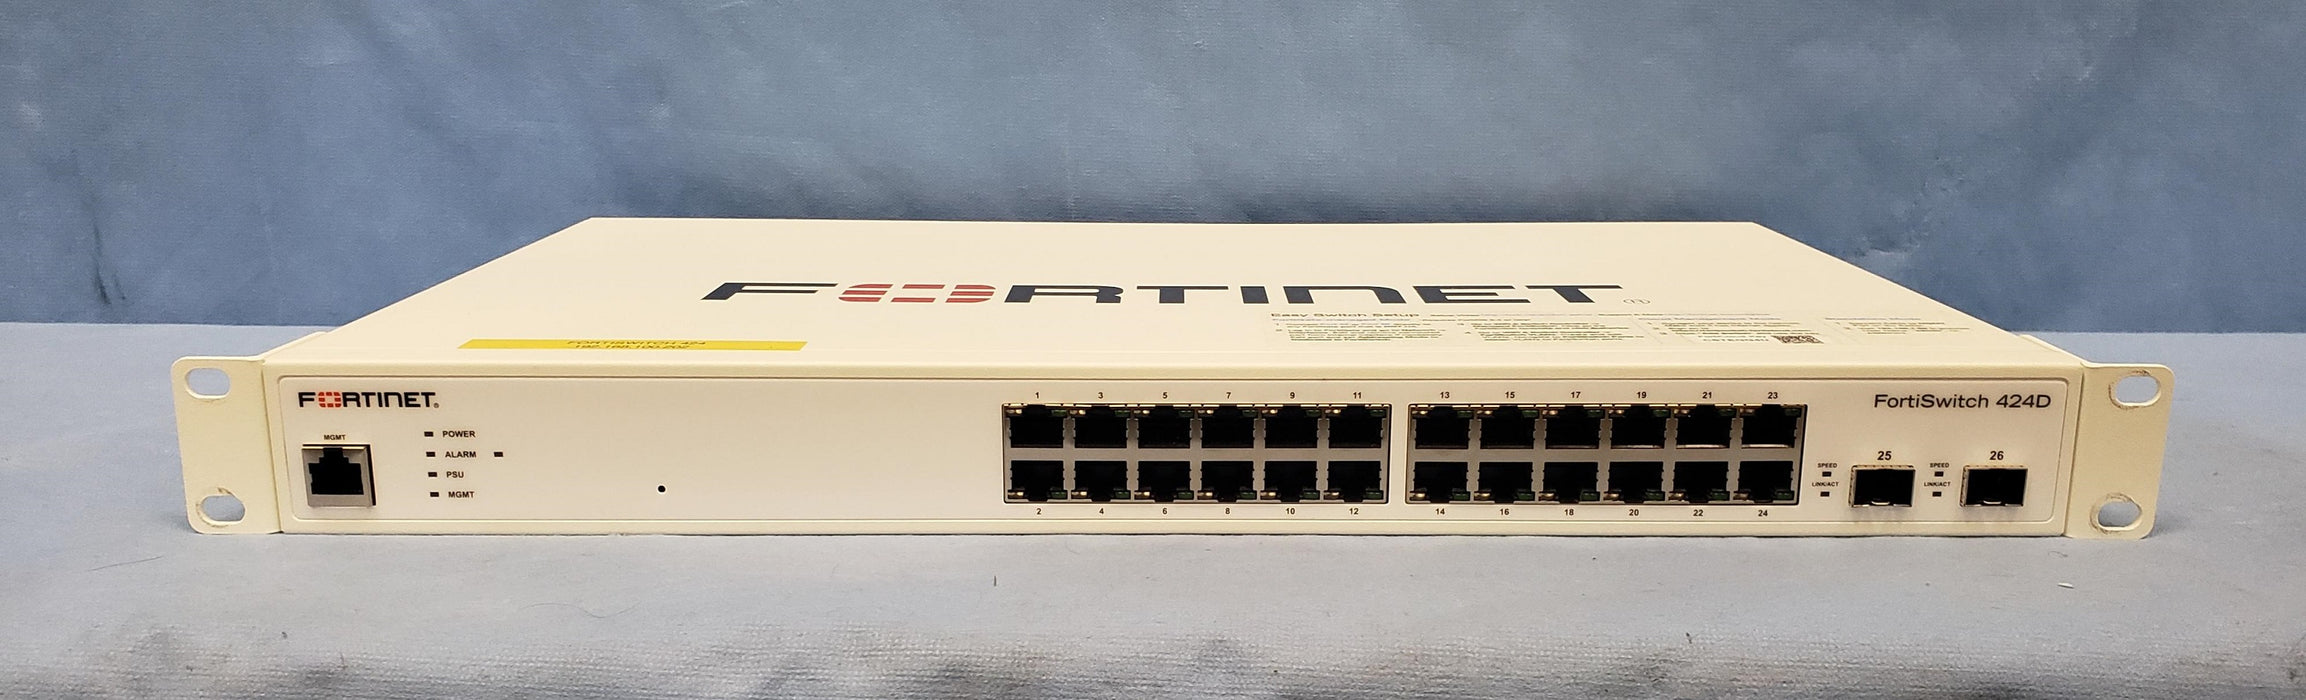 Fortinet FS-424D 24 Port GE 2x SFP+ Network FortiSwitch w/ Rack Ears